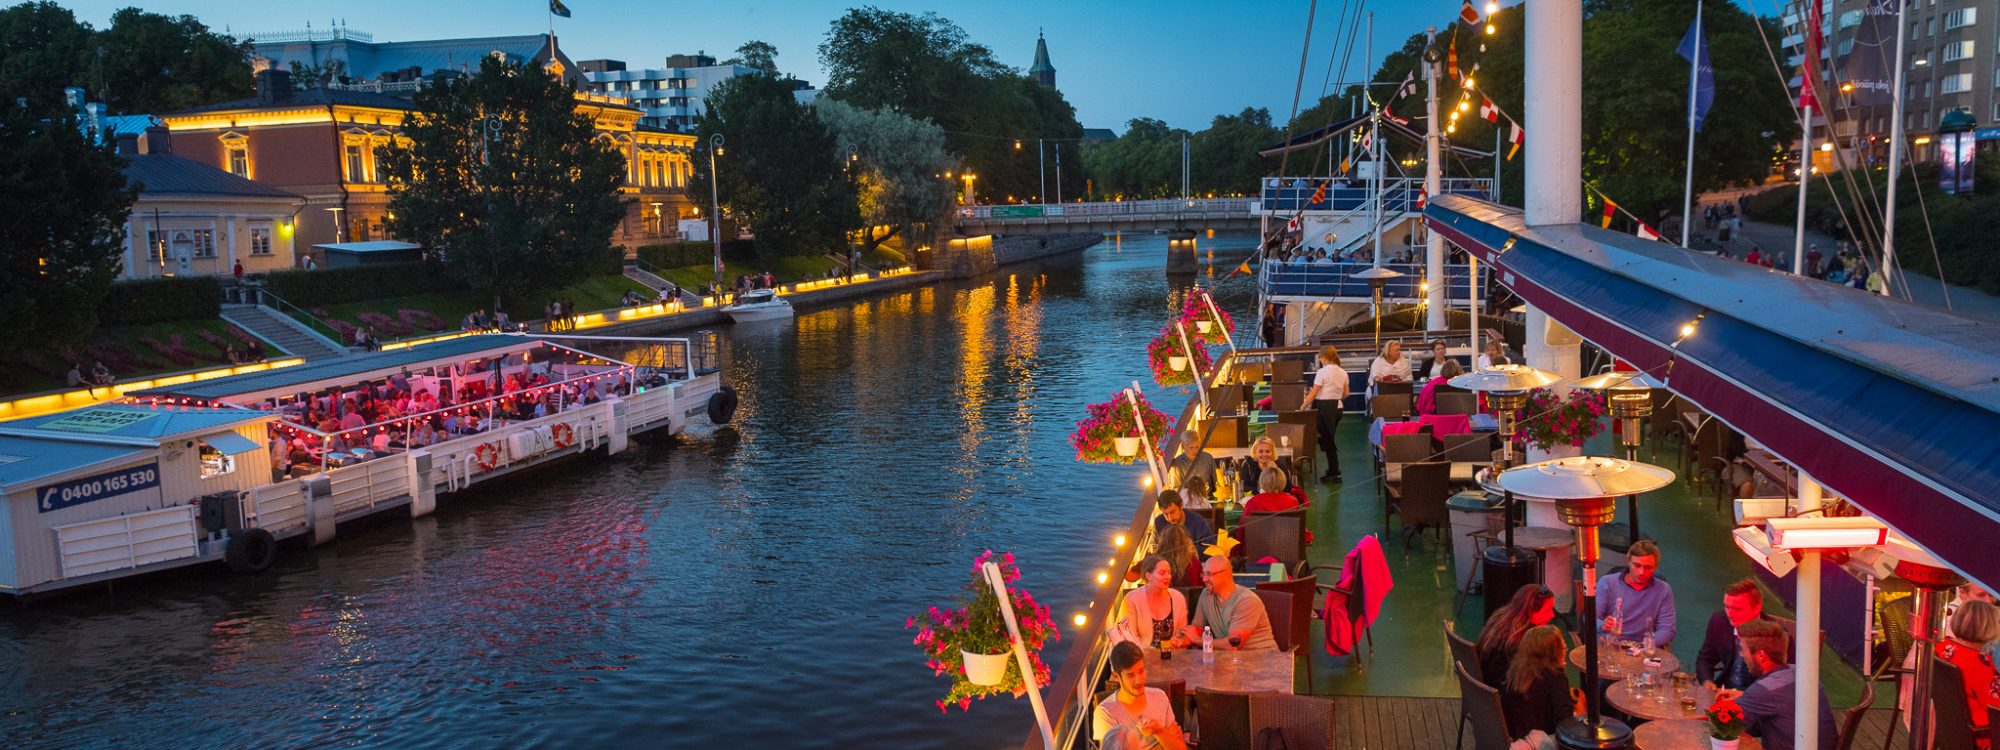 An evening photo of the Aura River in Turku. On both sides of the river there are lit up river boats with people enjoying beverages.